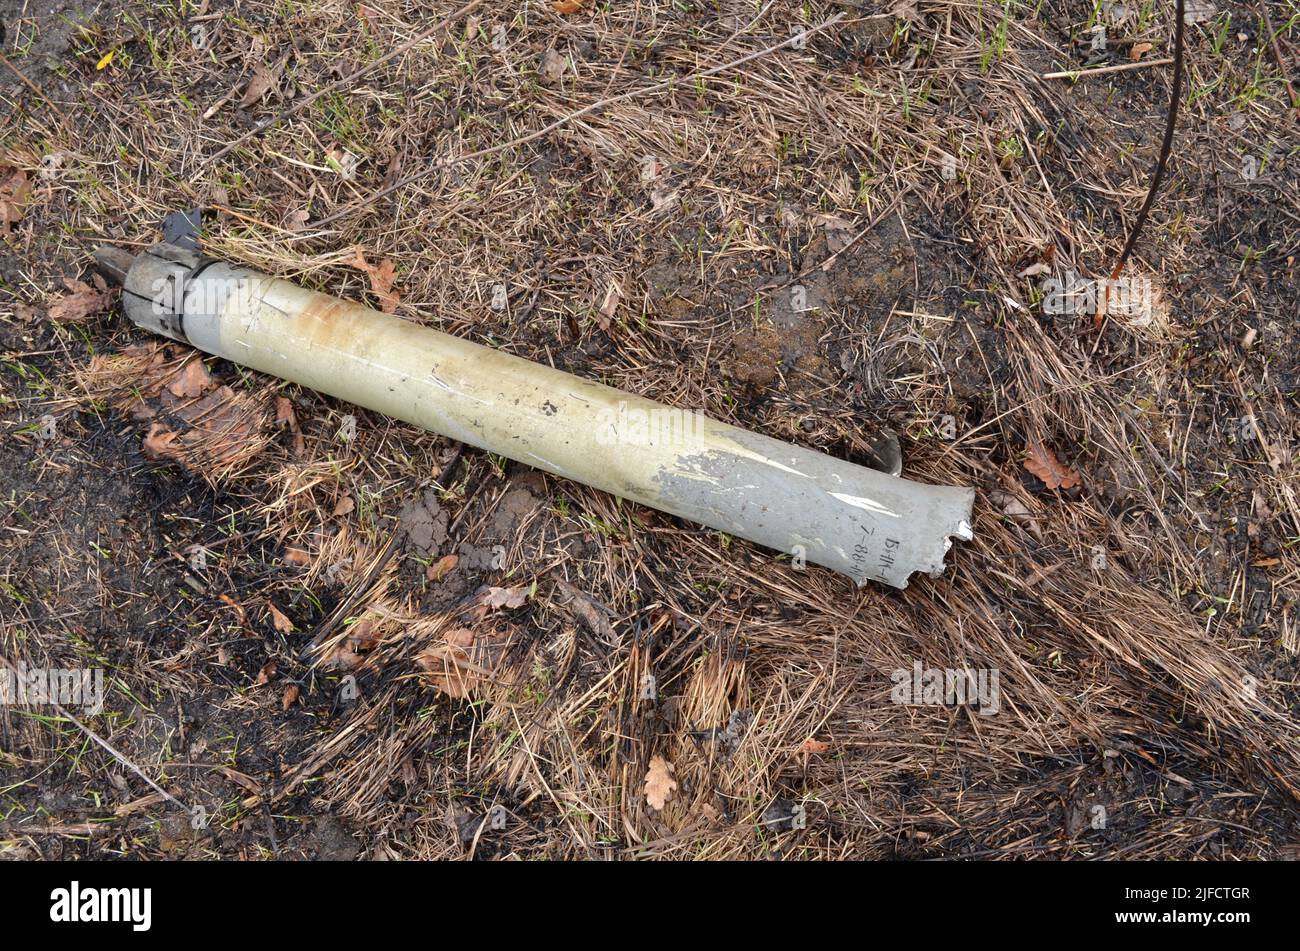 Dmytrivka, Kyiv region, Ukraine - Apr 03, 2022: Remains of an unguided rocket that fell near residential buildings during active hostilities. Stock Photo